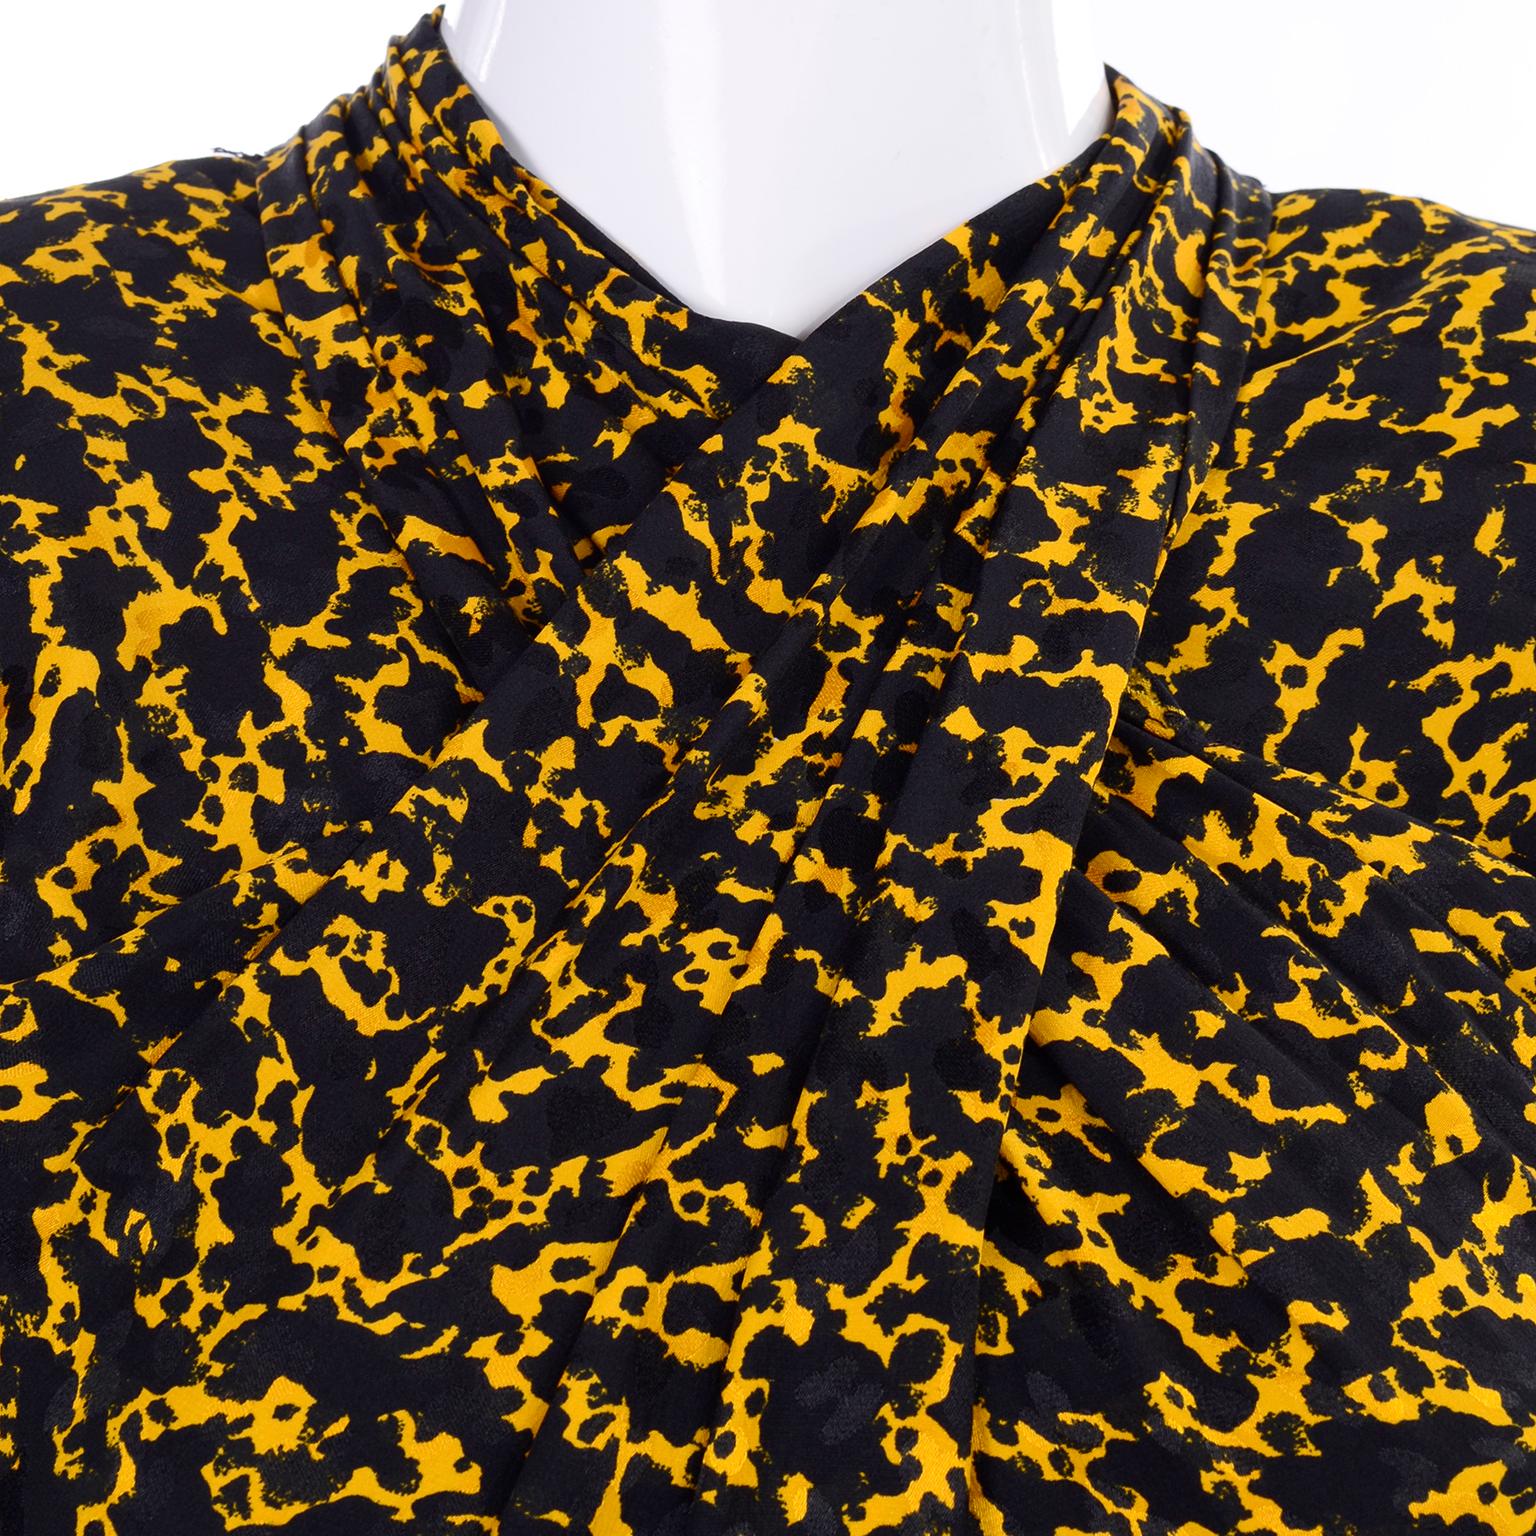 Vicky Tiel Peplum Top & Skirt Dress / Suit in Yellow & Black Abstract Silk Print In Excellent Condition For Sale In Portland, OR